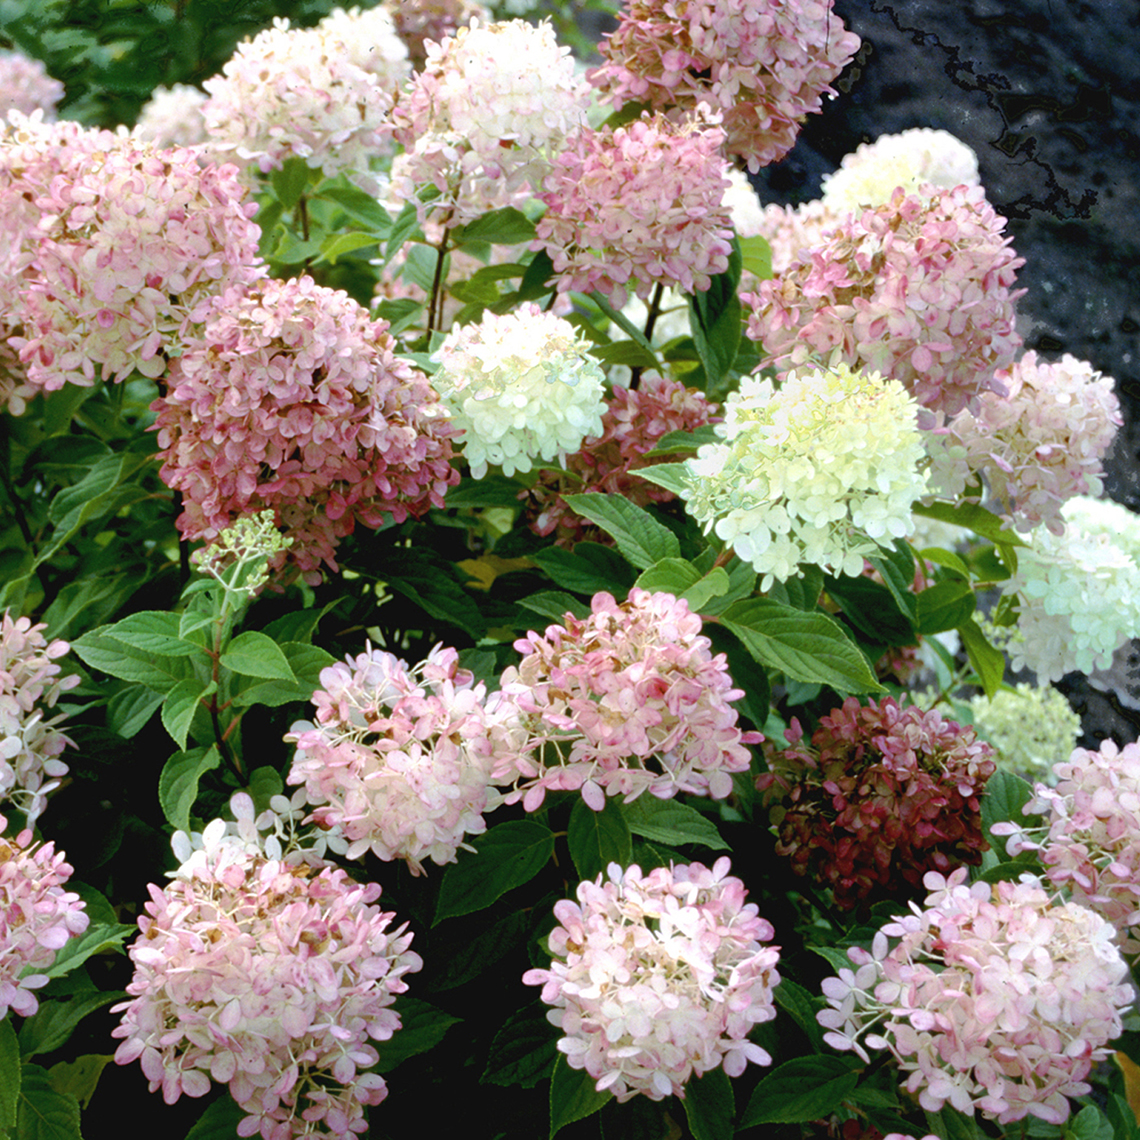 The blooms of Limelight panicle hydrangea taking on pink red and burgundy tones